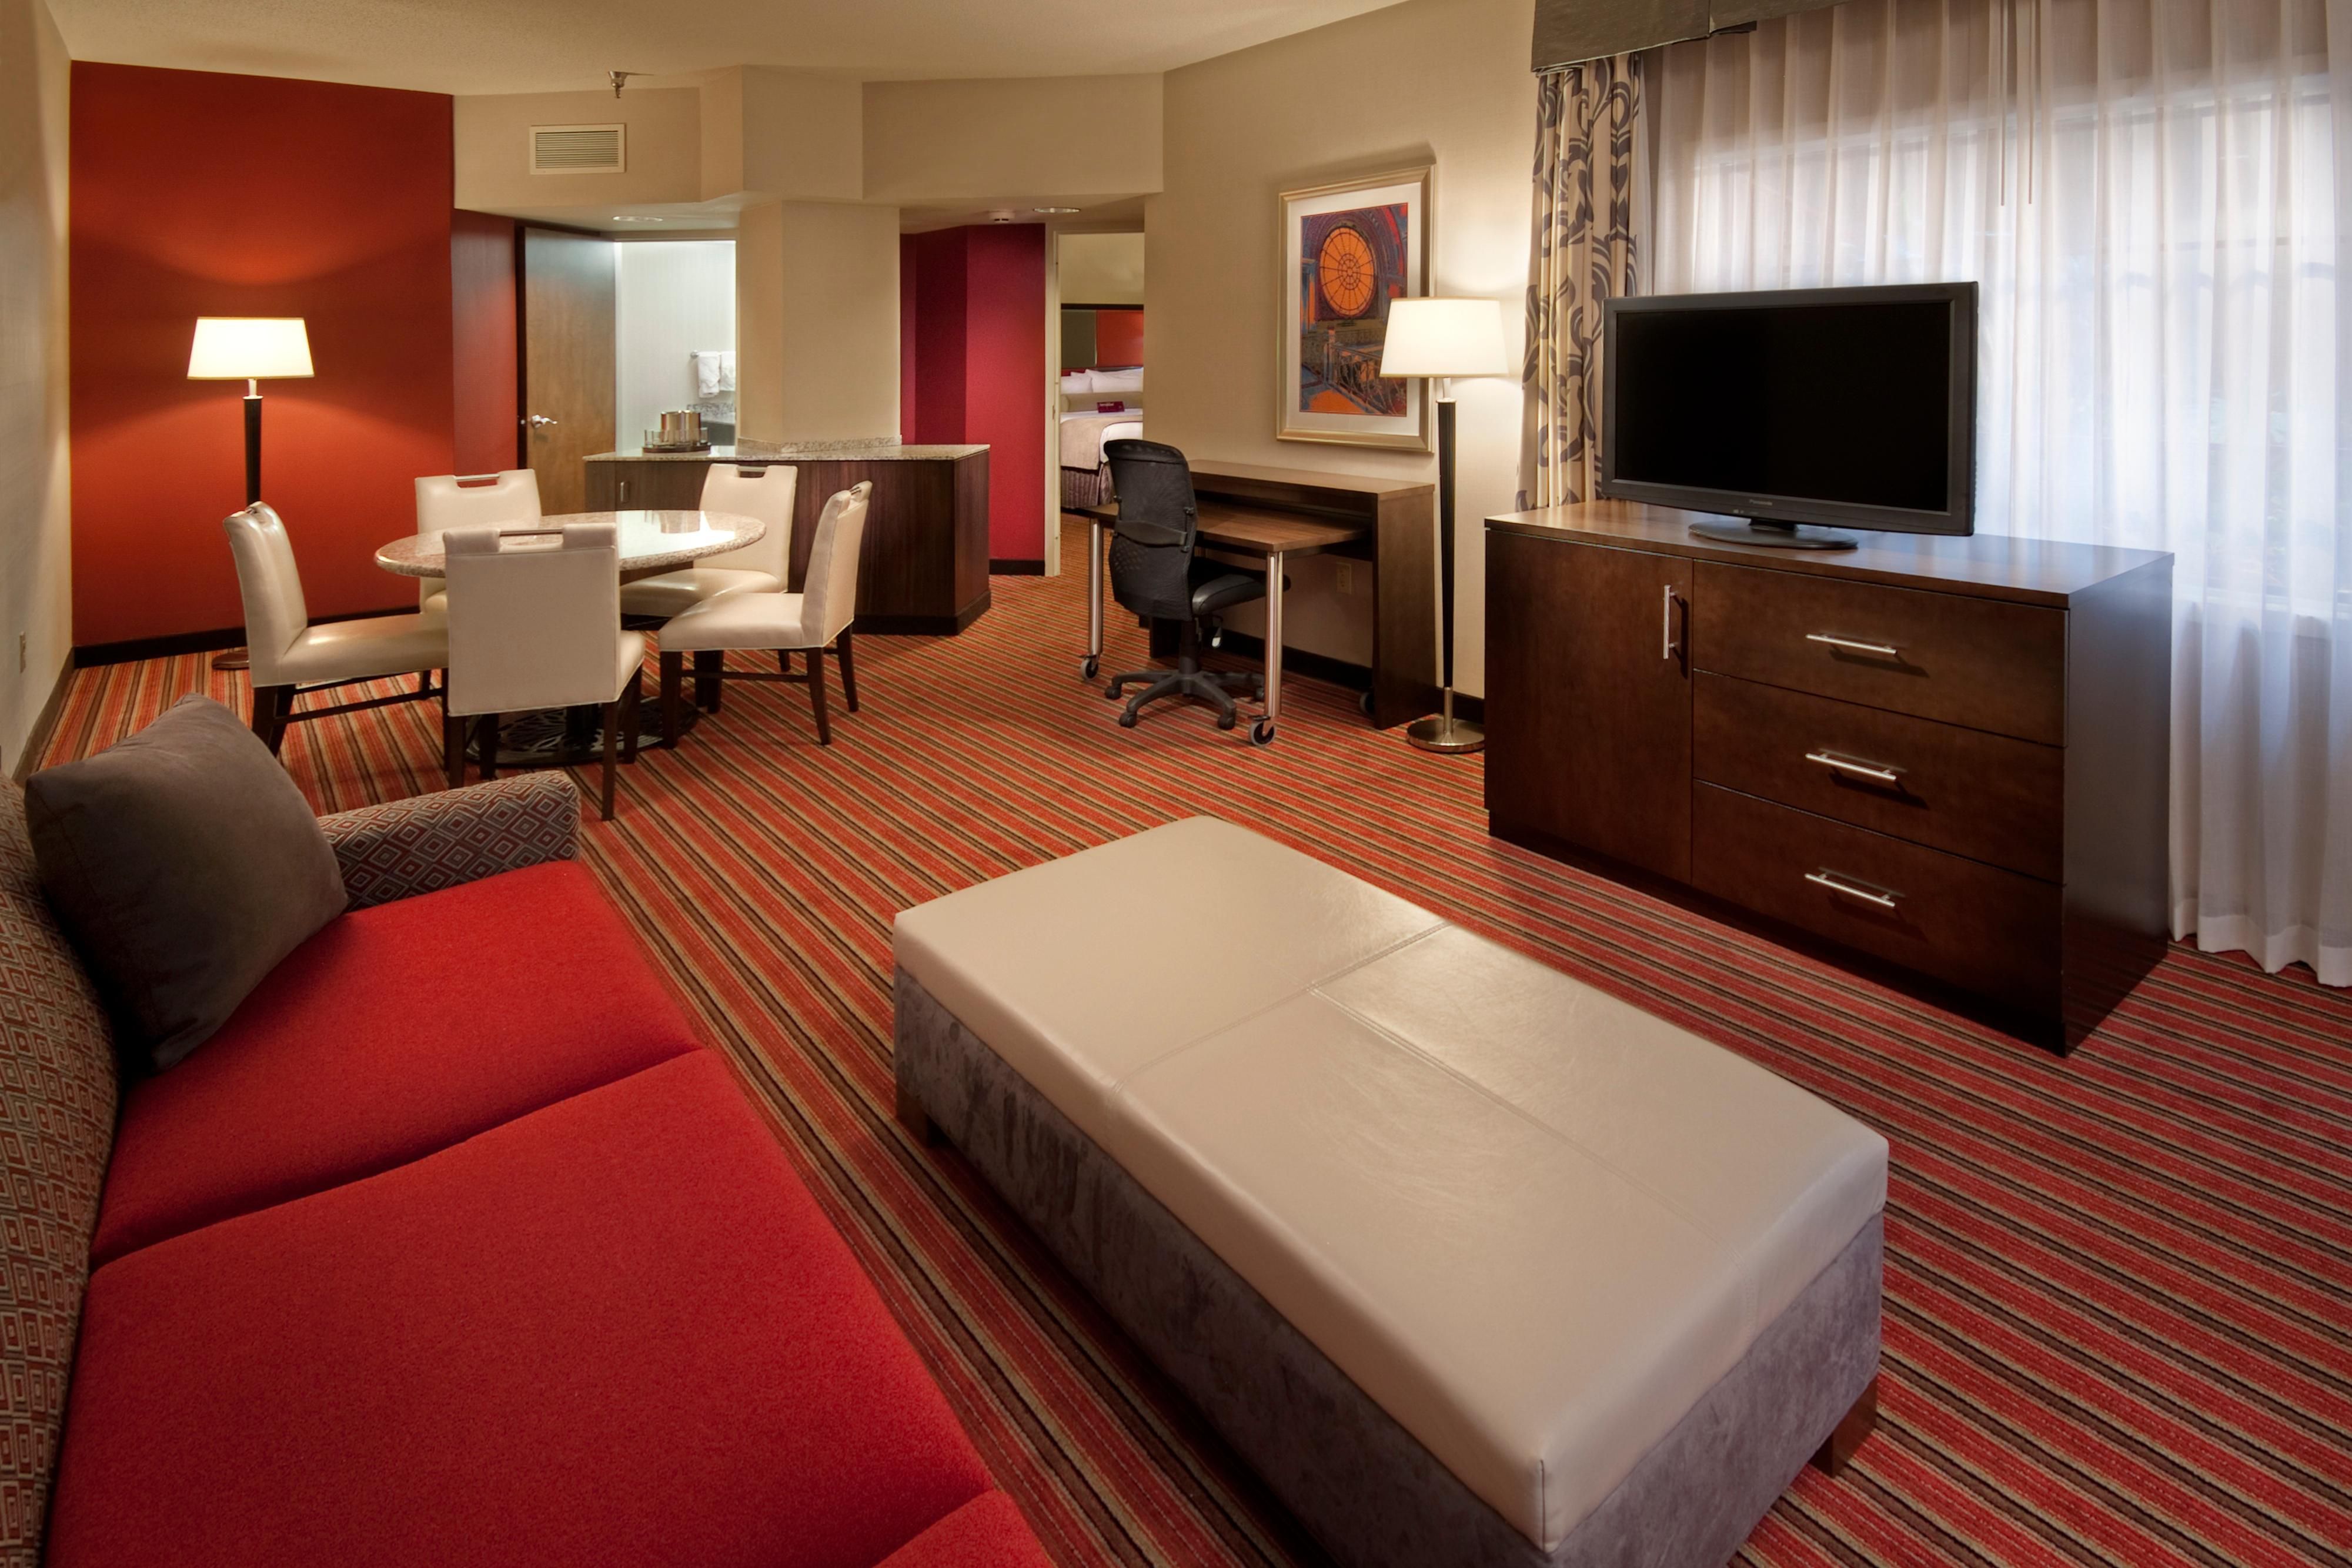 Our Master Suite has everything you need for a great night.